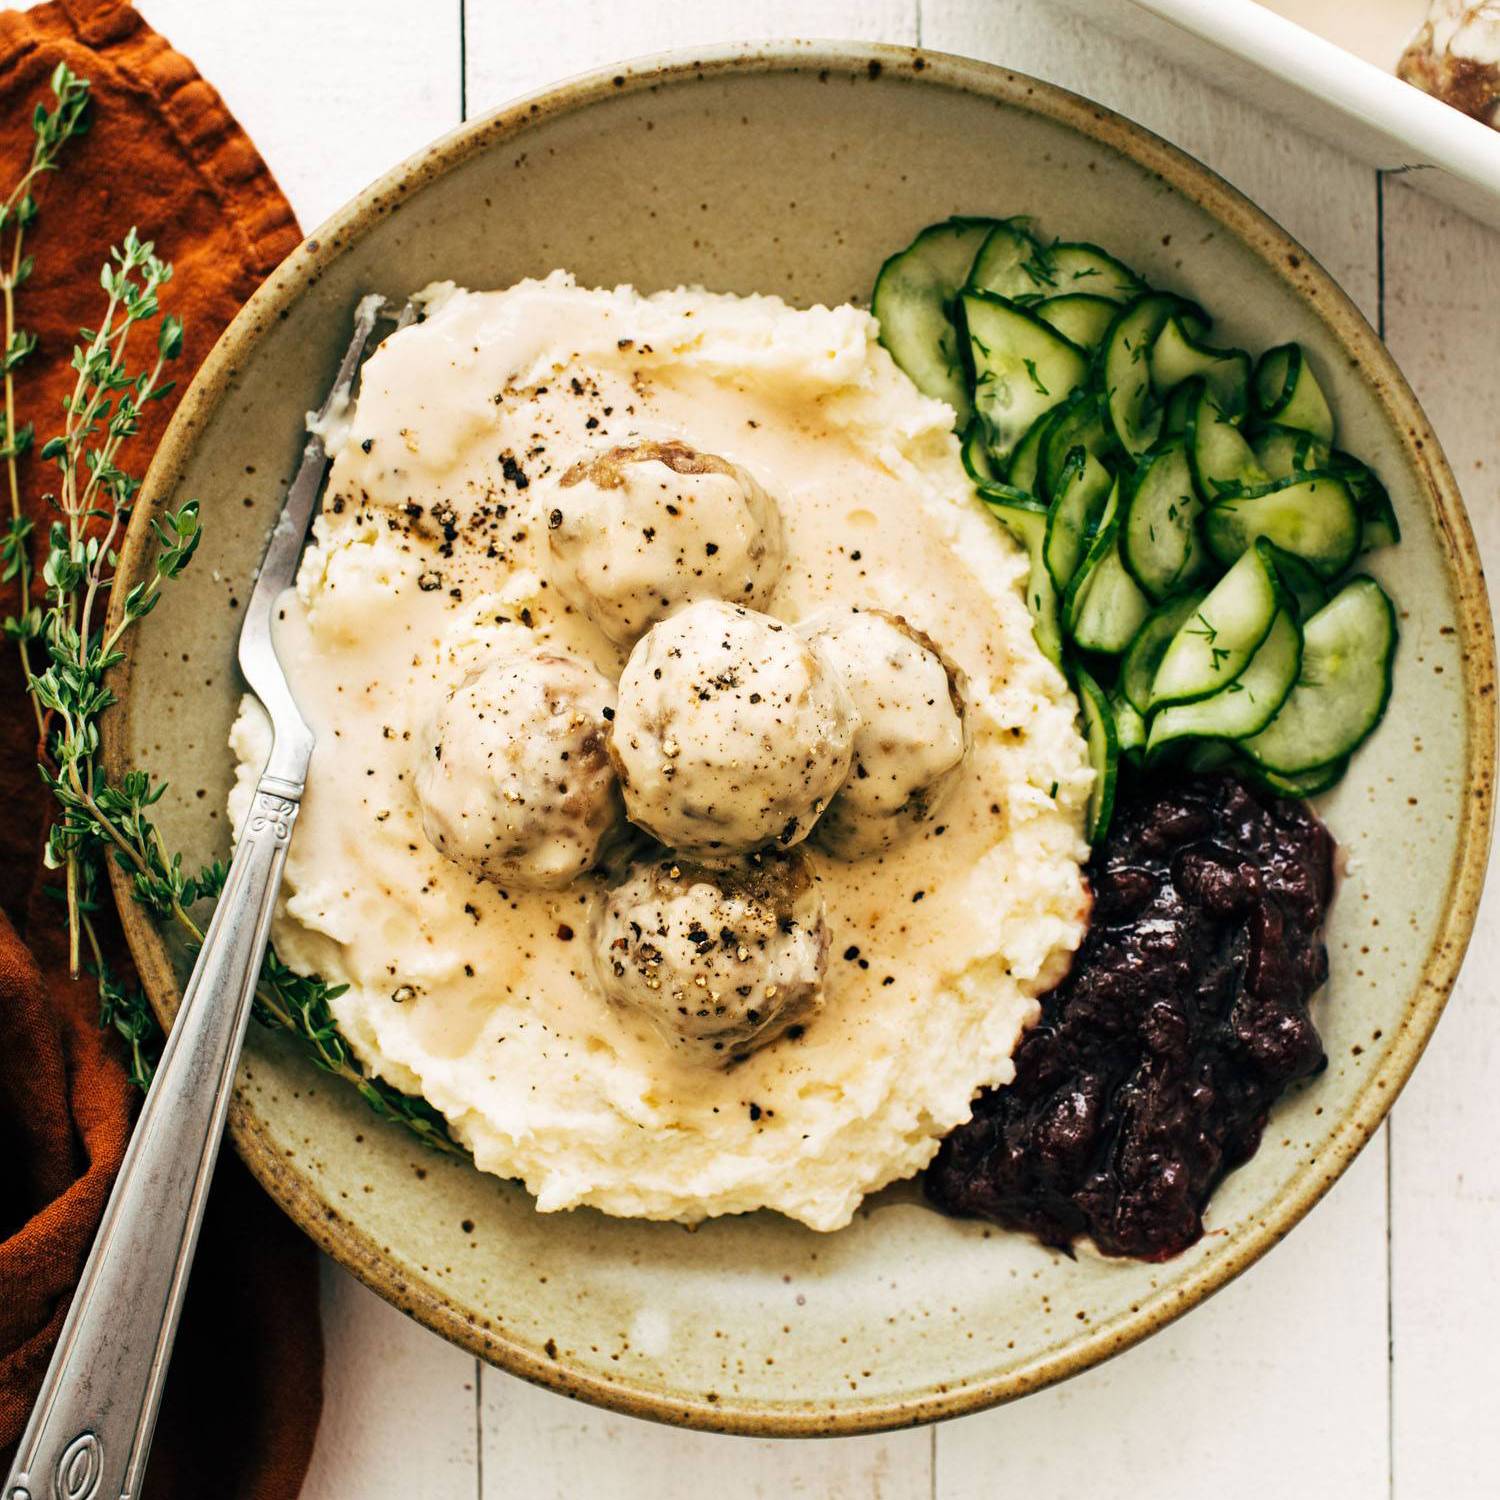 Swedish meatballs in a bowl with cranberries and cucumbers.